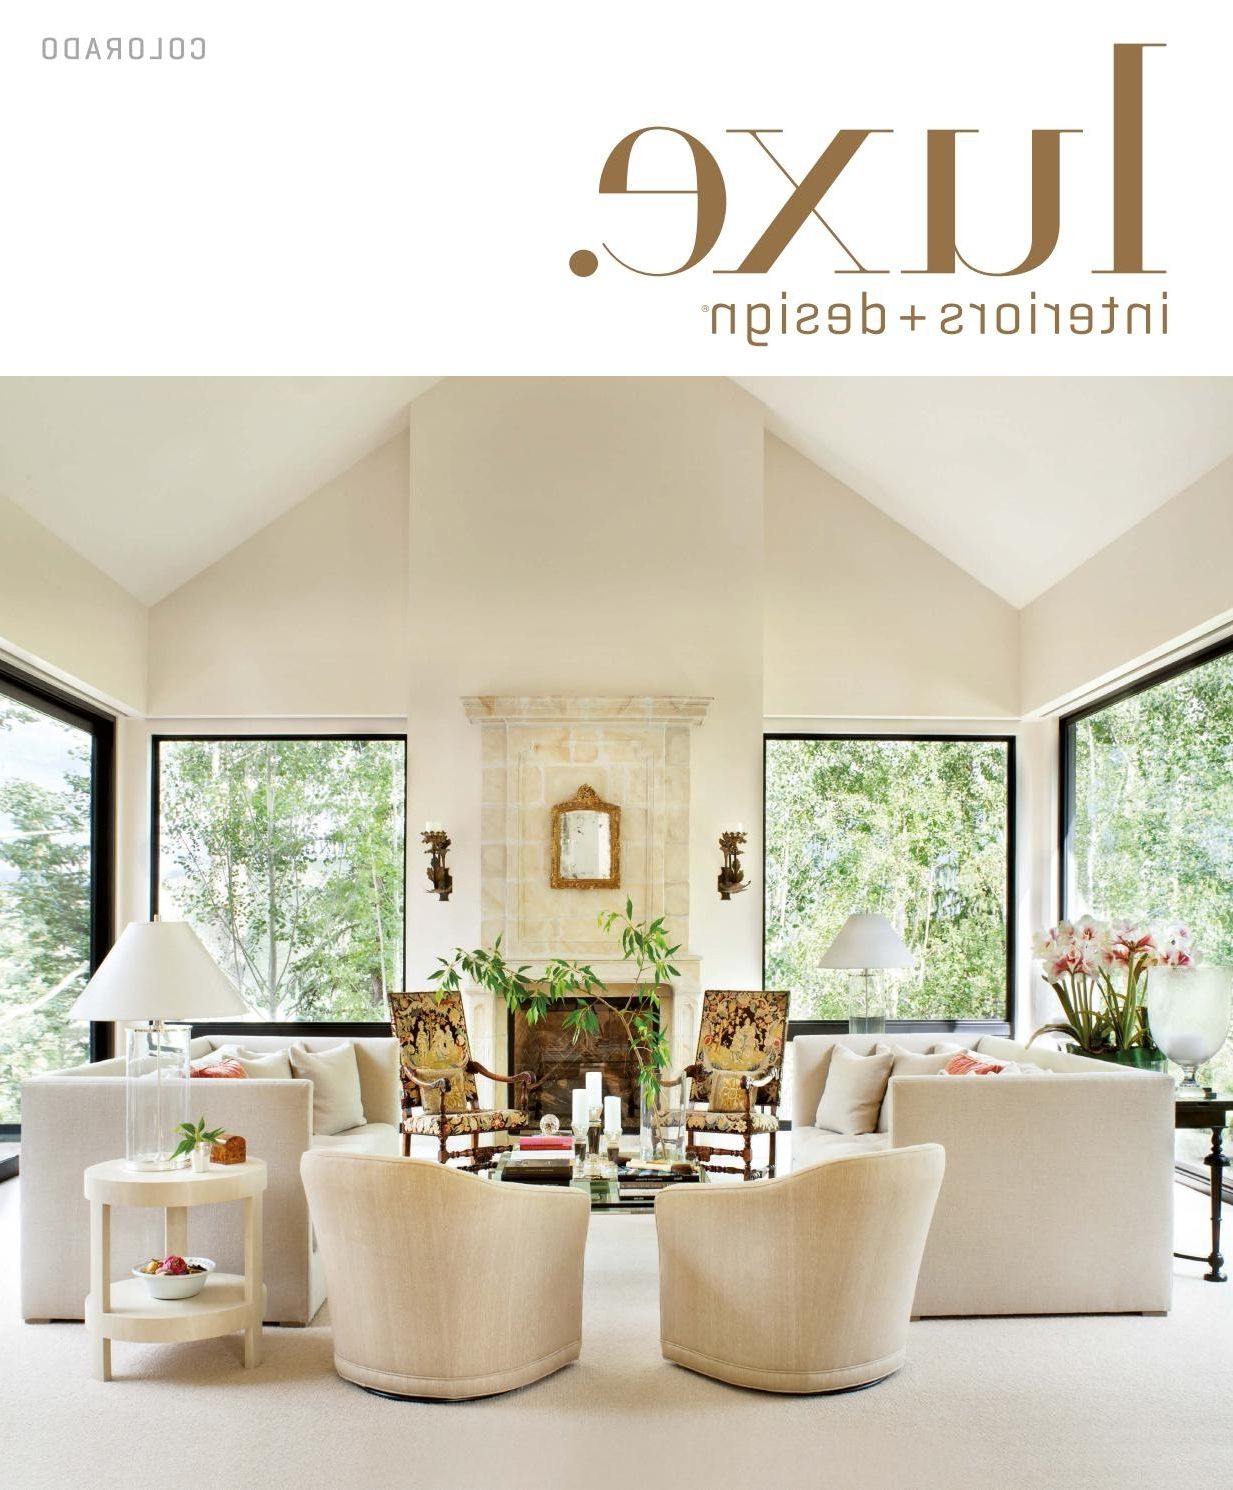 Combs 5 Piece 48 Inch Extension Dining Sets With Pearson White Chairs Pertaining To Most Current Luxe Magazine July 2016 Coloradosandow® – Issuu (View 15 of 25)